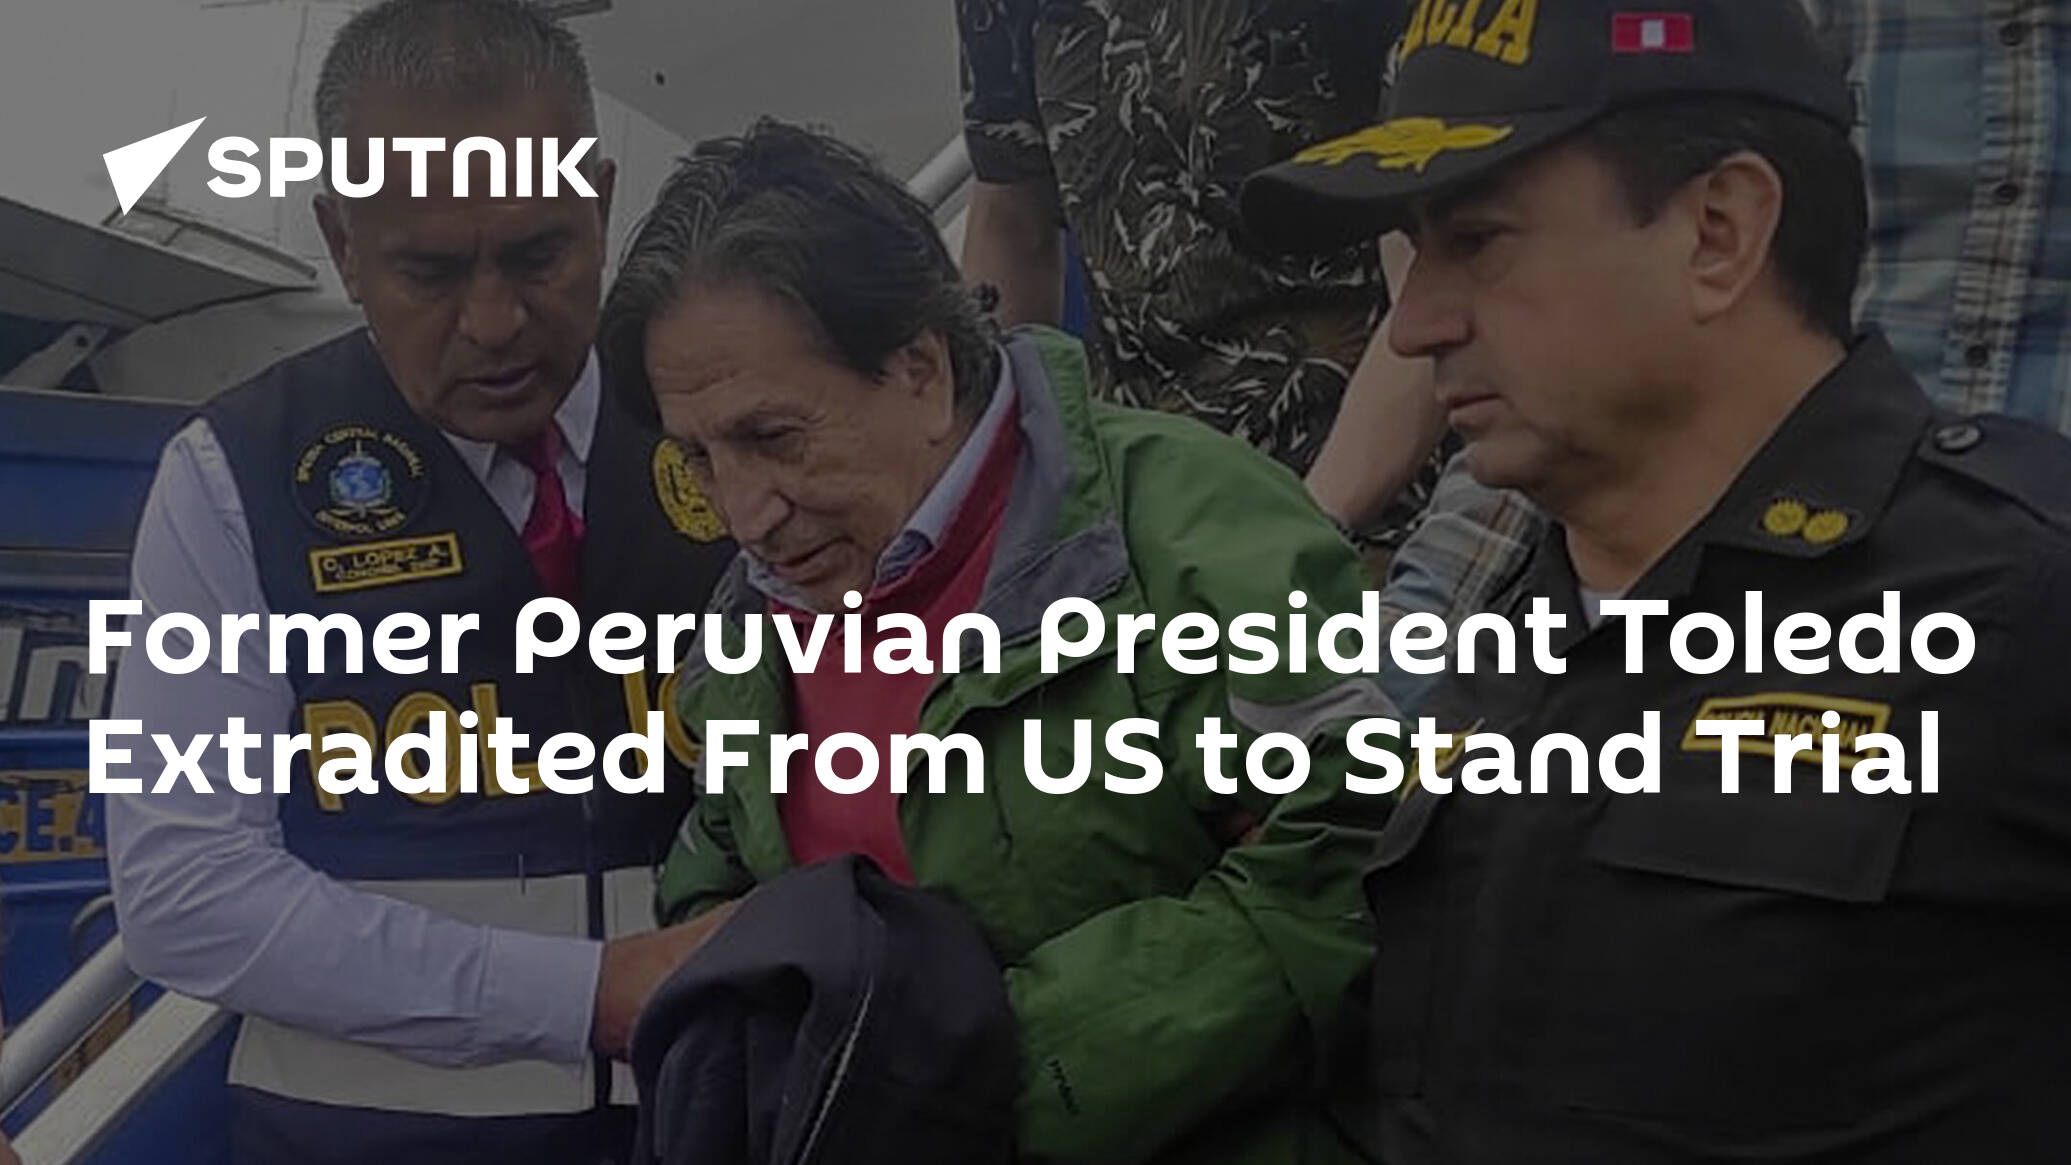 Former Peruvian President Toledo Extradited From US to Stand Trial